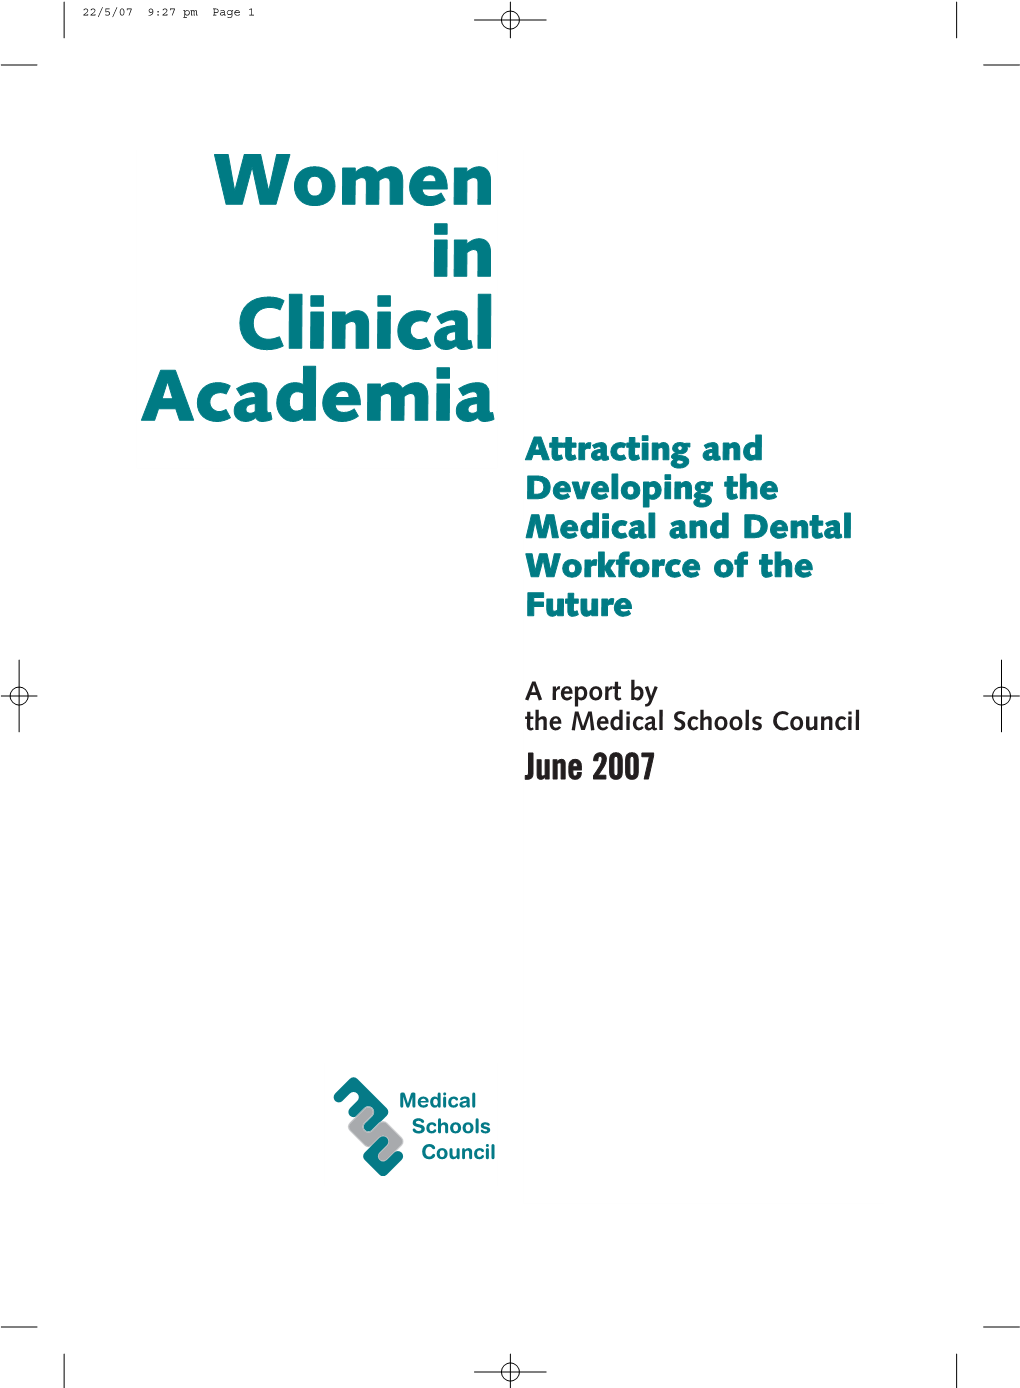 Women in Clinical Academia Attracting and Developing the Medical and Dental Workforce of the Future